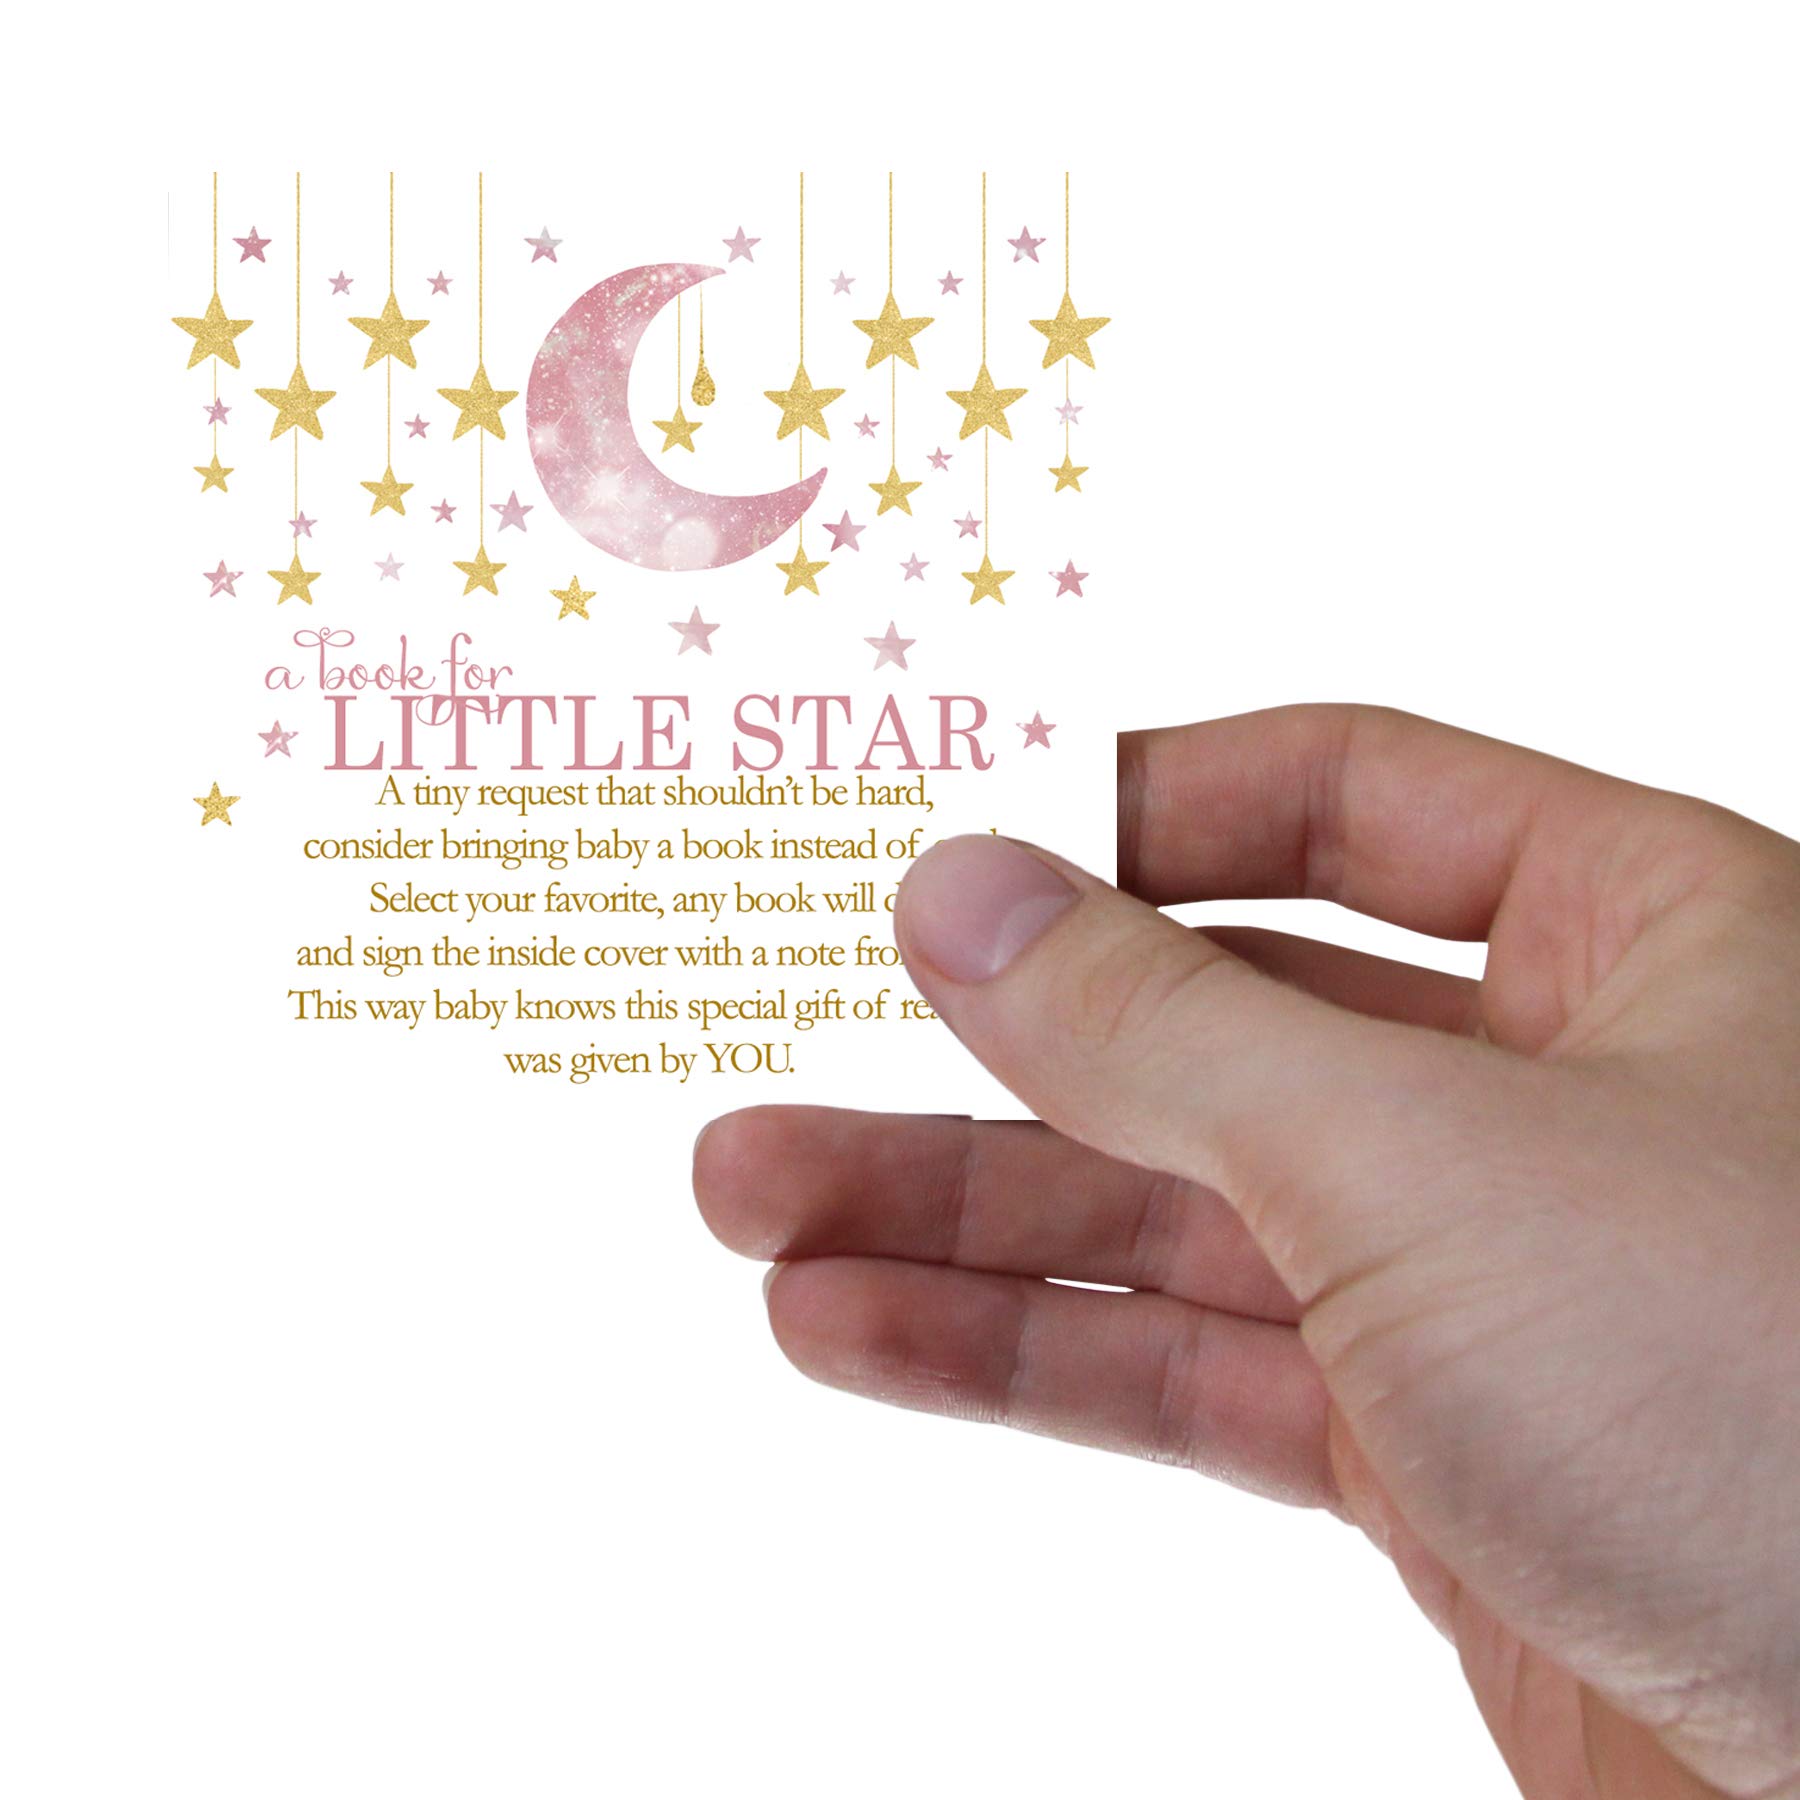 Paper Clever Party Twinkle Little Star Baby Shower Book Request Cards (25 Pack) Invitation Inserts Girls - Pink and Gold Moon